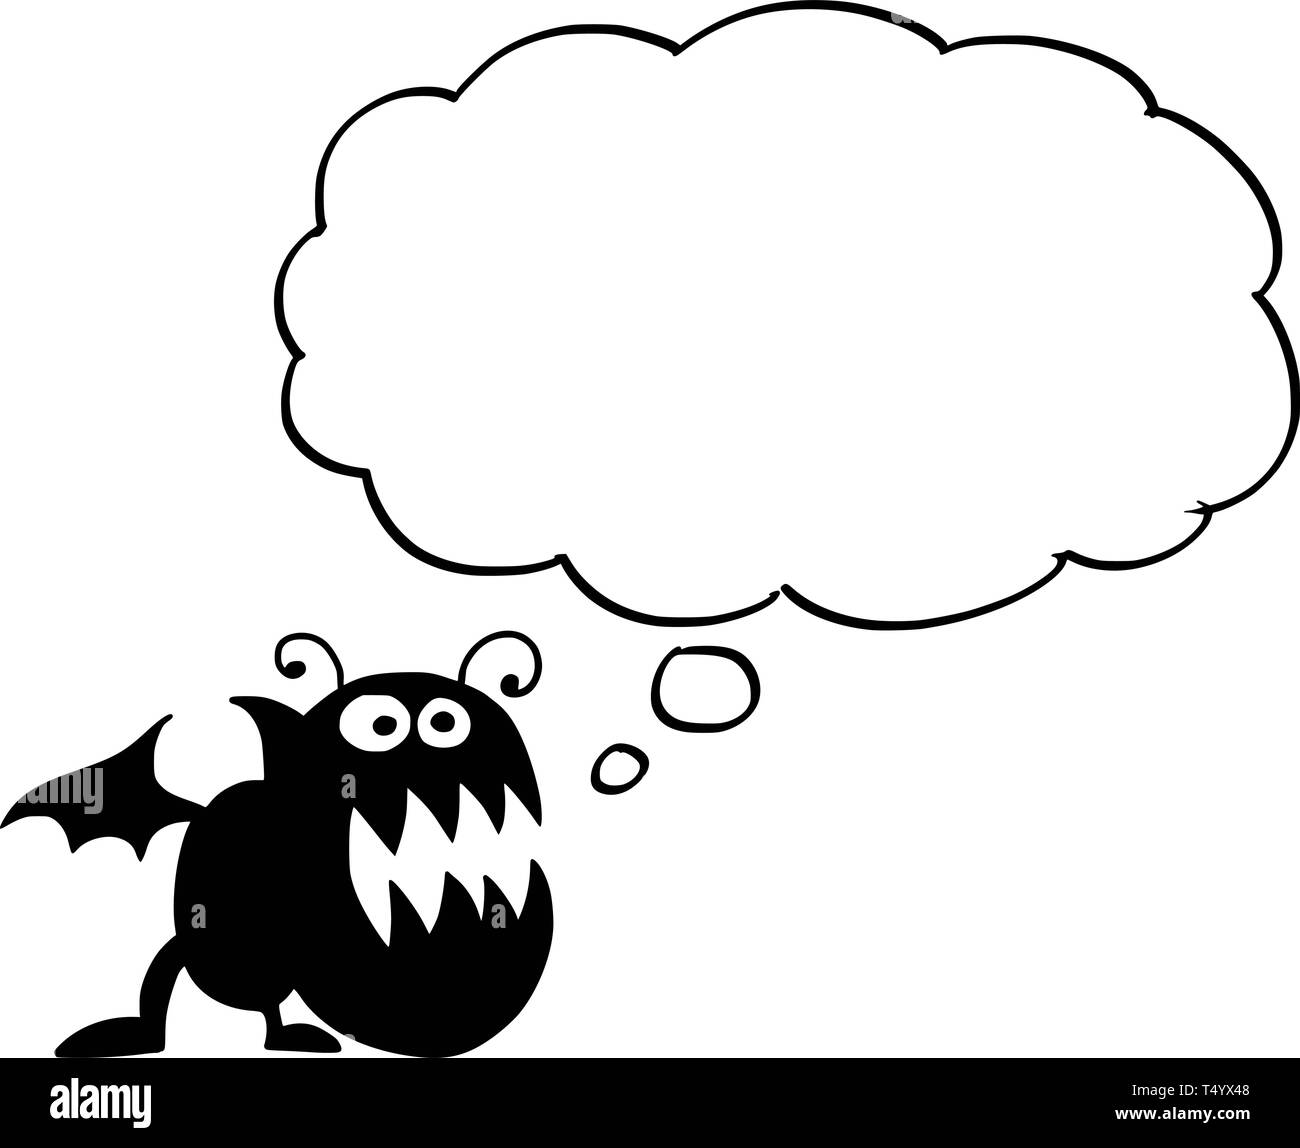 Cartoon drawing conceptual illustration of crazy flat black monster with empty text bubble or speech balloon ready for your text. Stock Vector